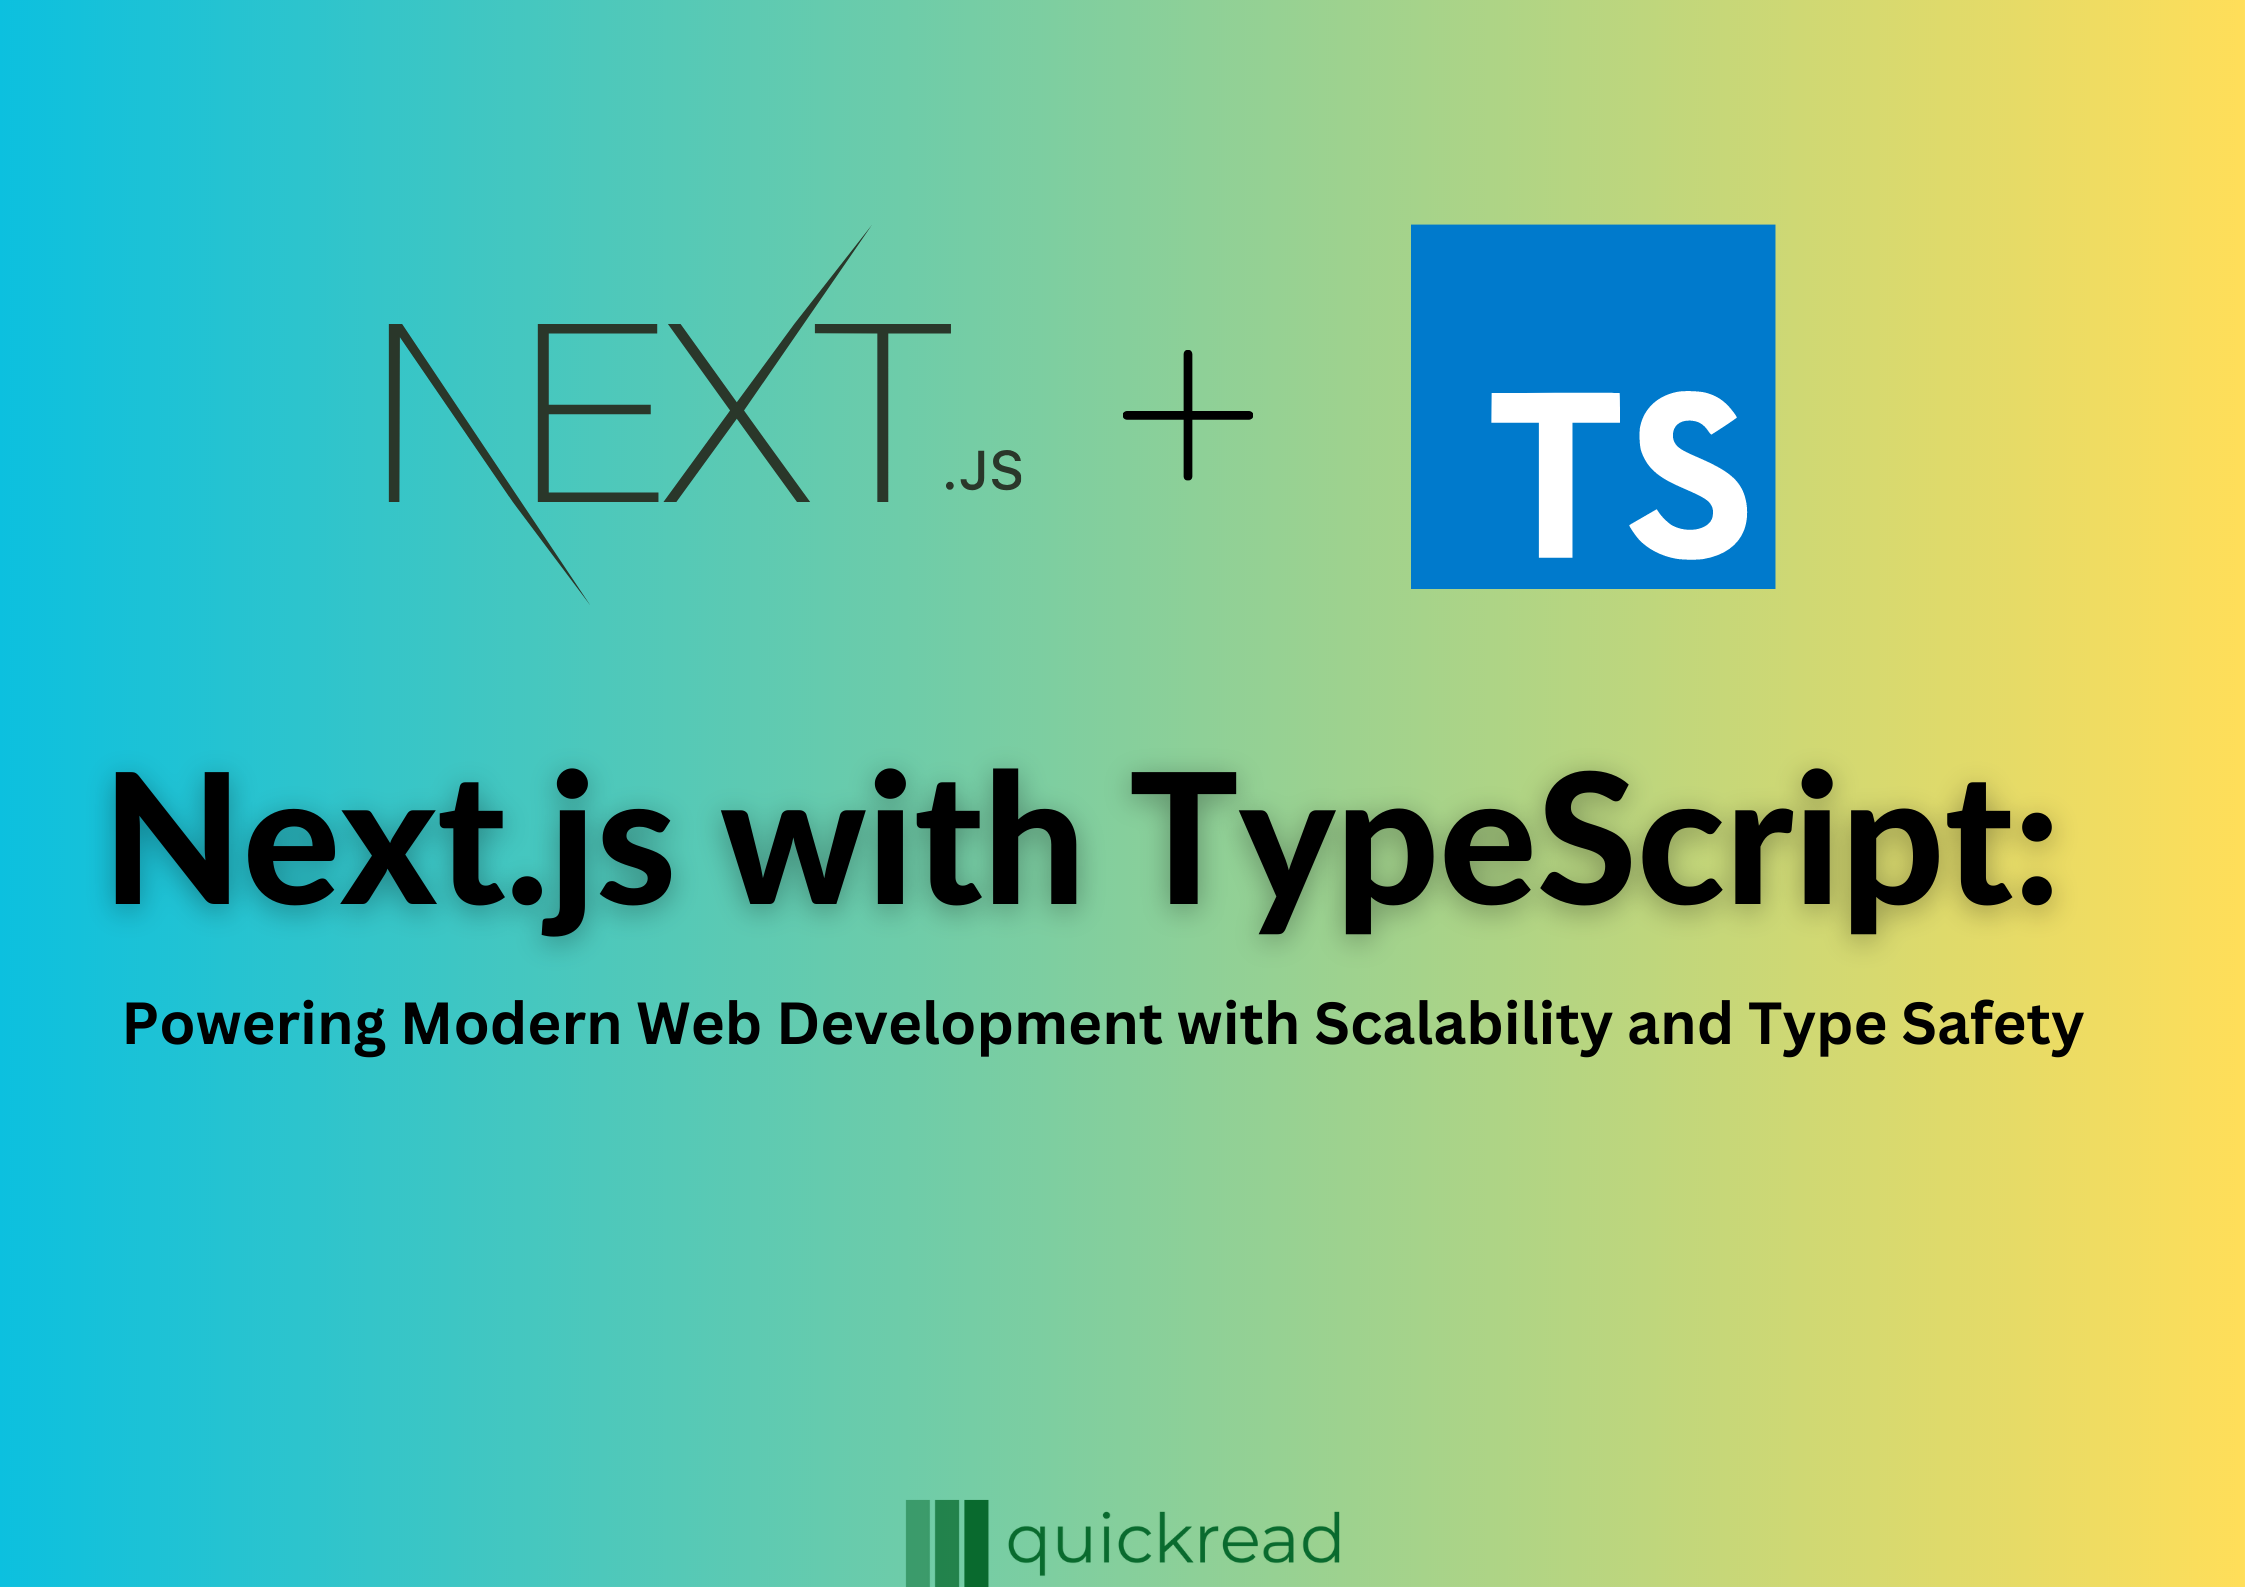 Next.js with Typescript Powering Modern Web Development with Scalability and Type Safety